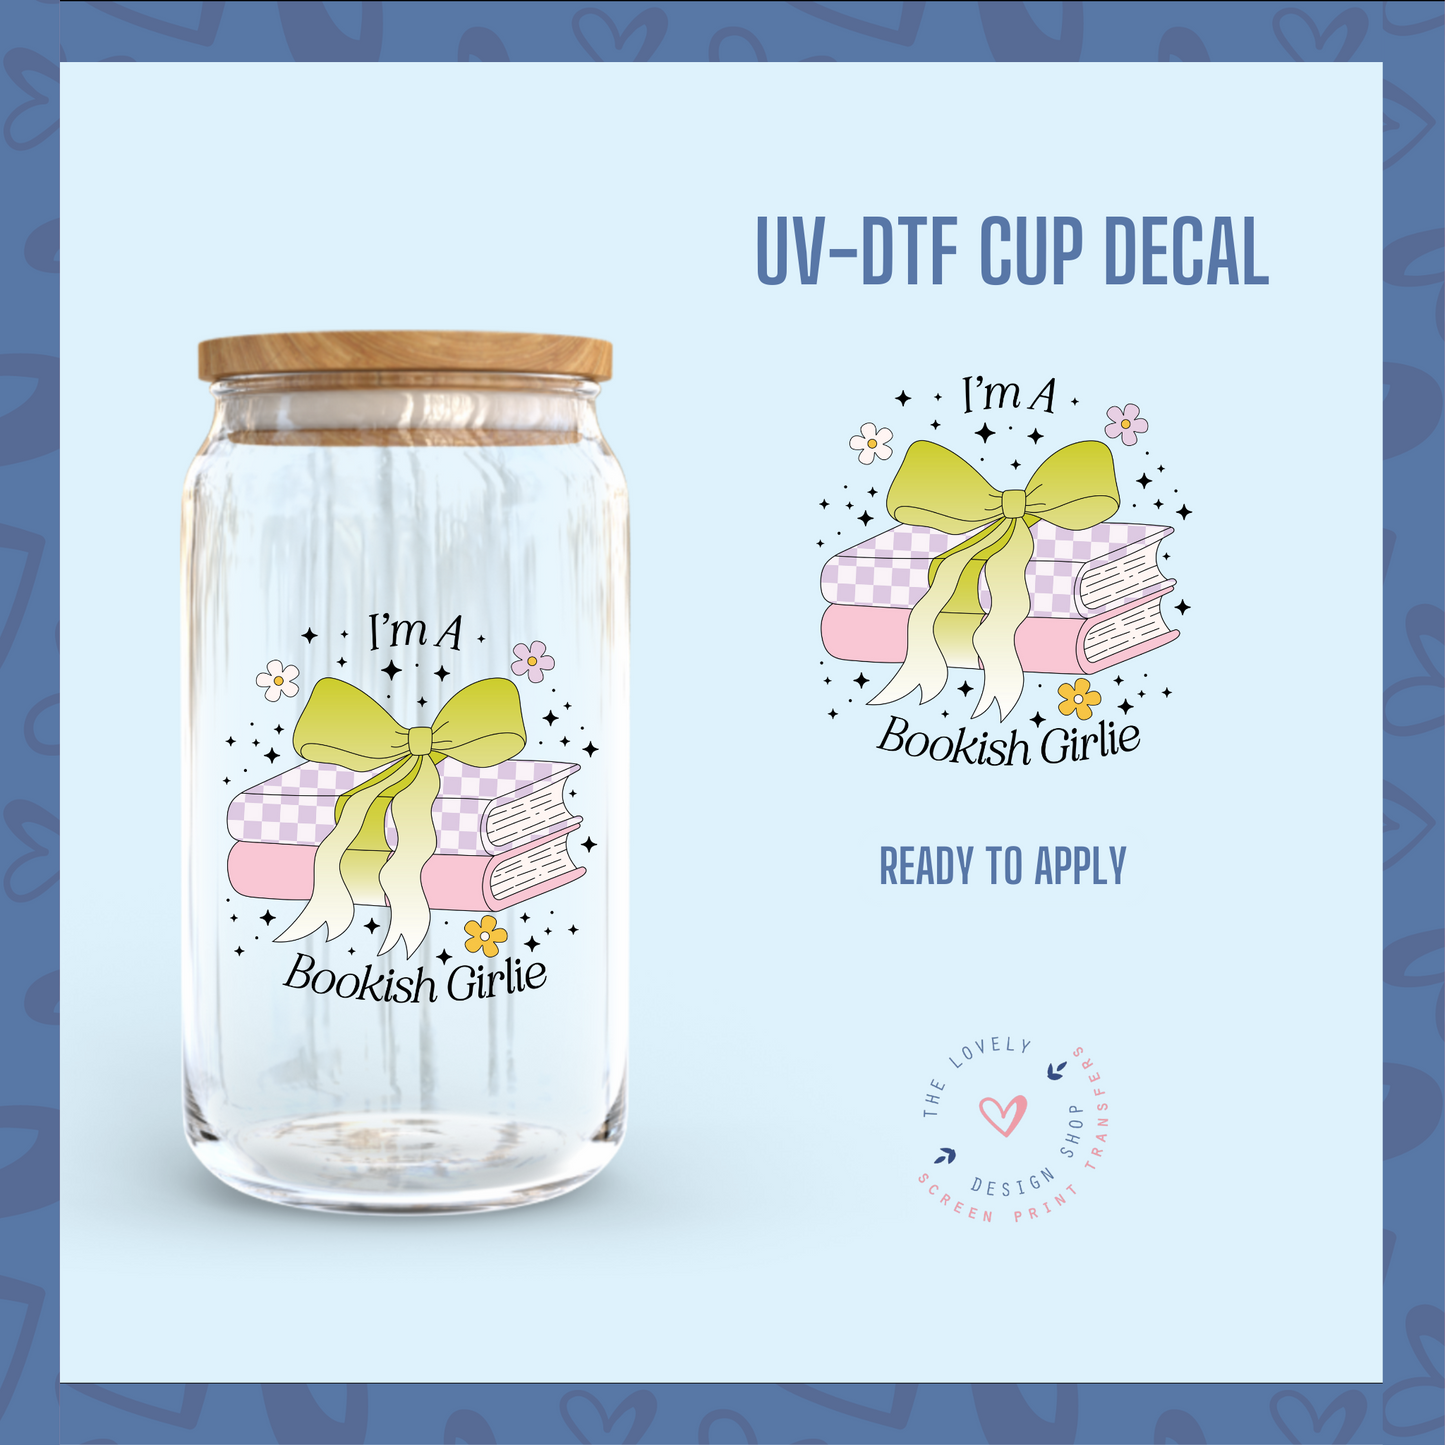 I'm A Bookish Girlie - UV DTF Cup Decal (Ready to Ship) Mar 4